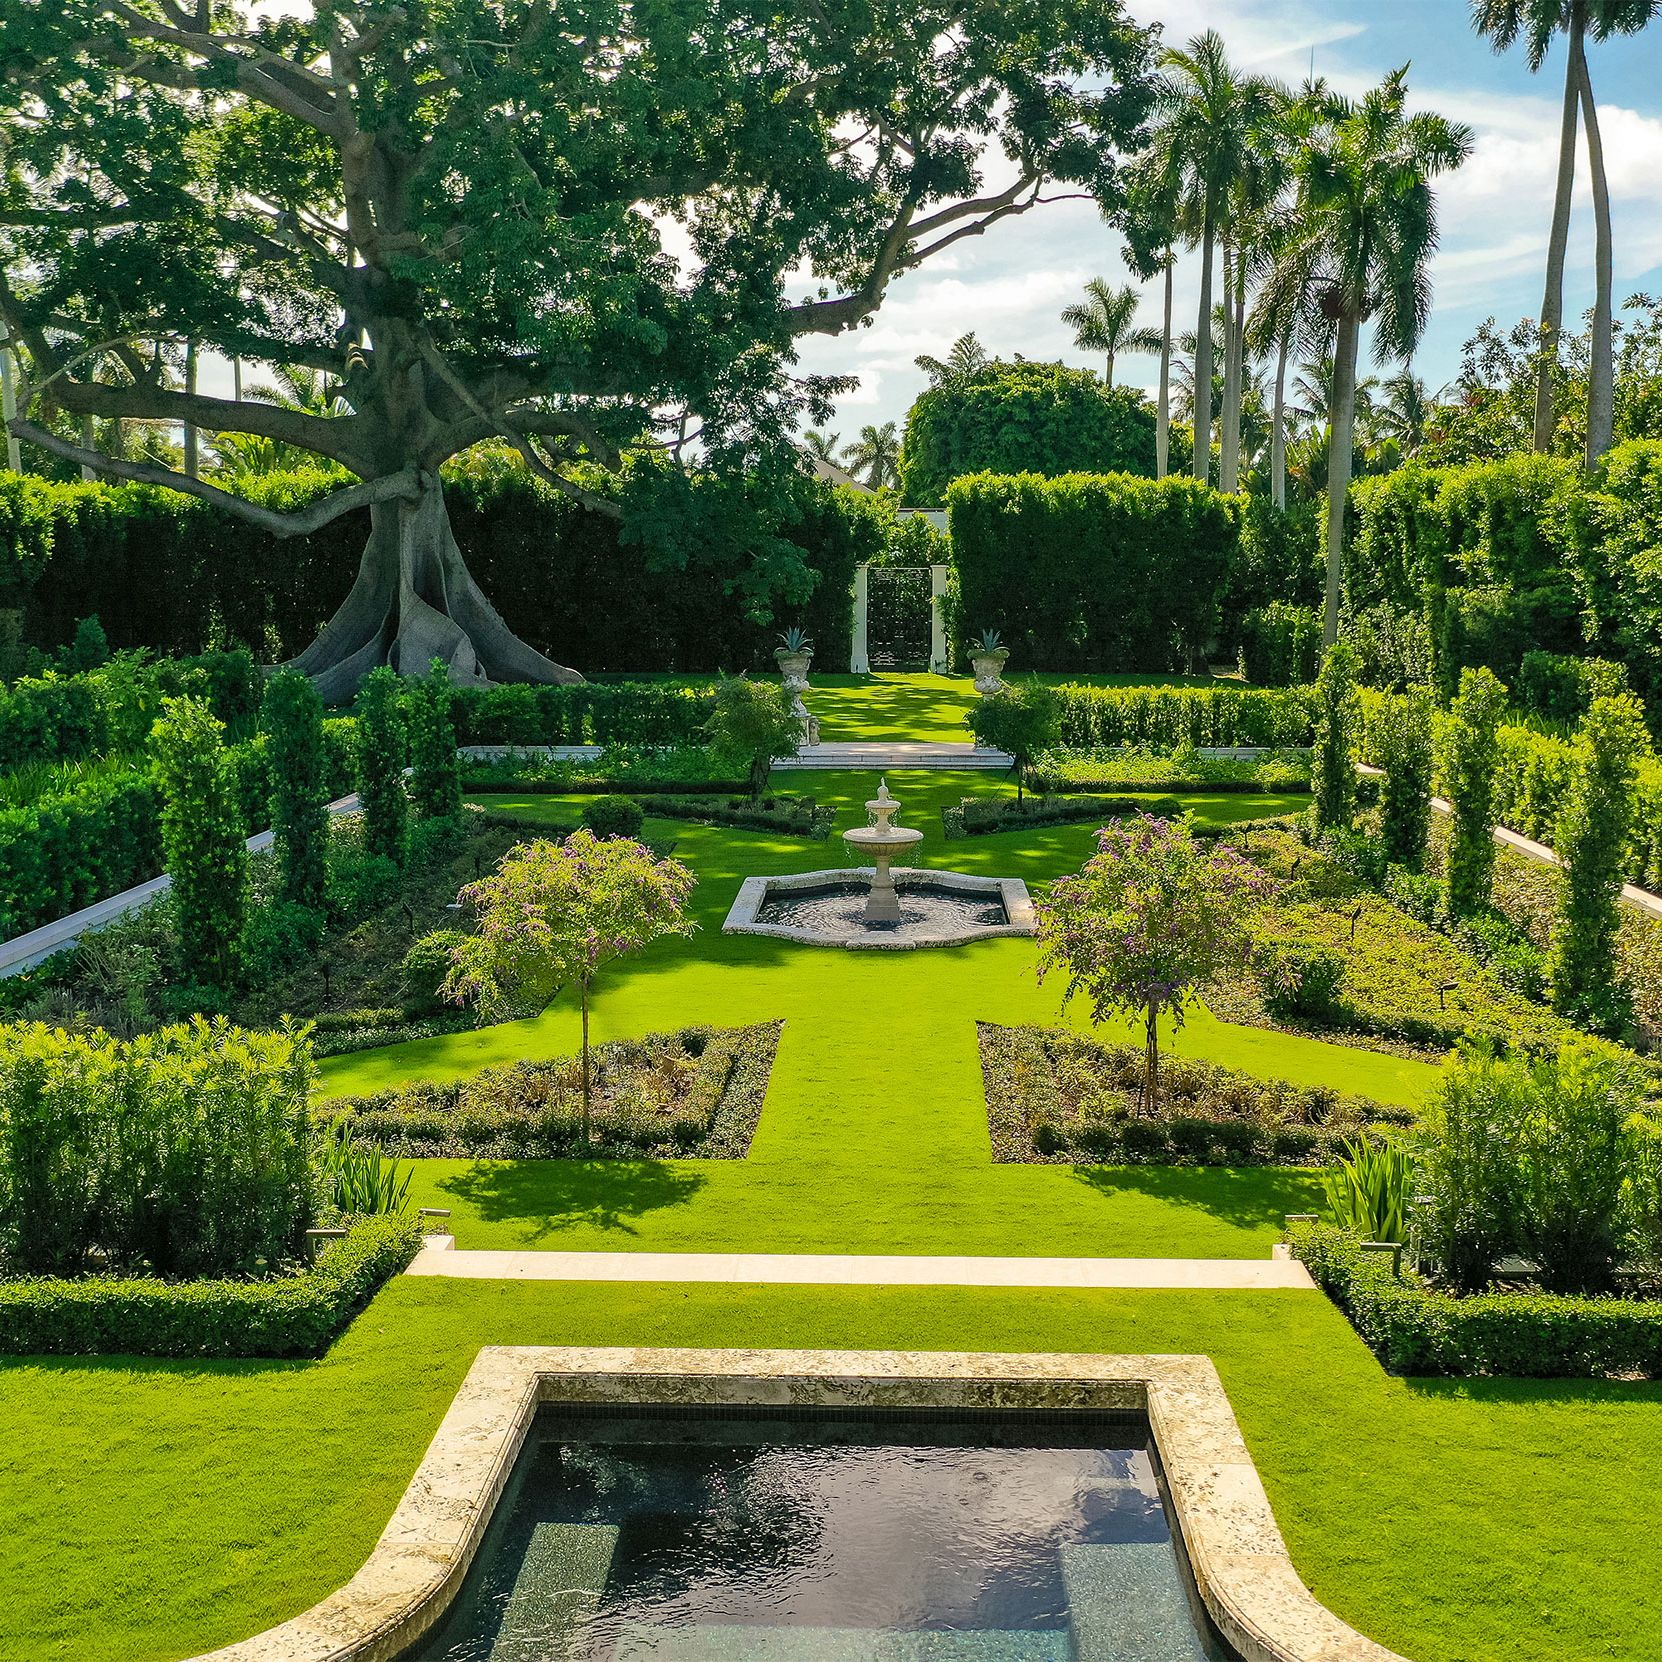 The Dos and Don’ts of Gardening, According to Two Landscape Stars